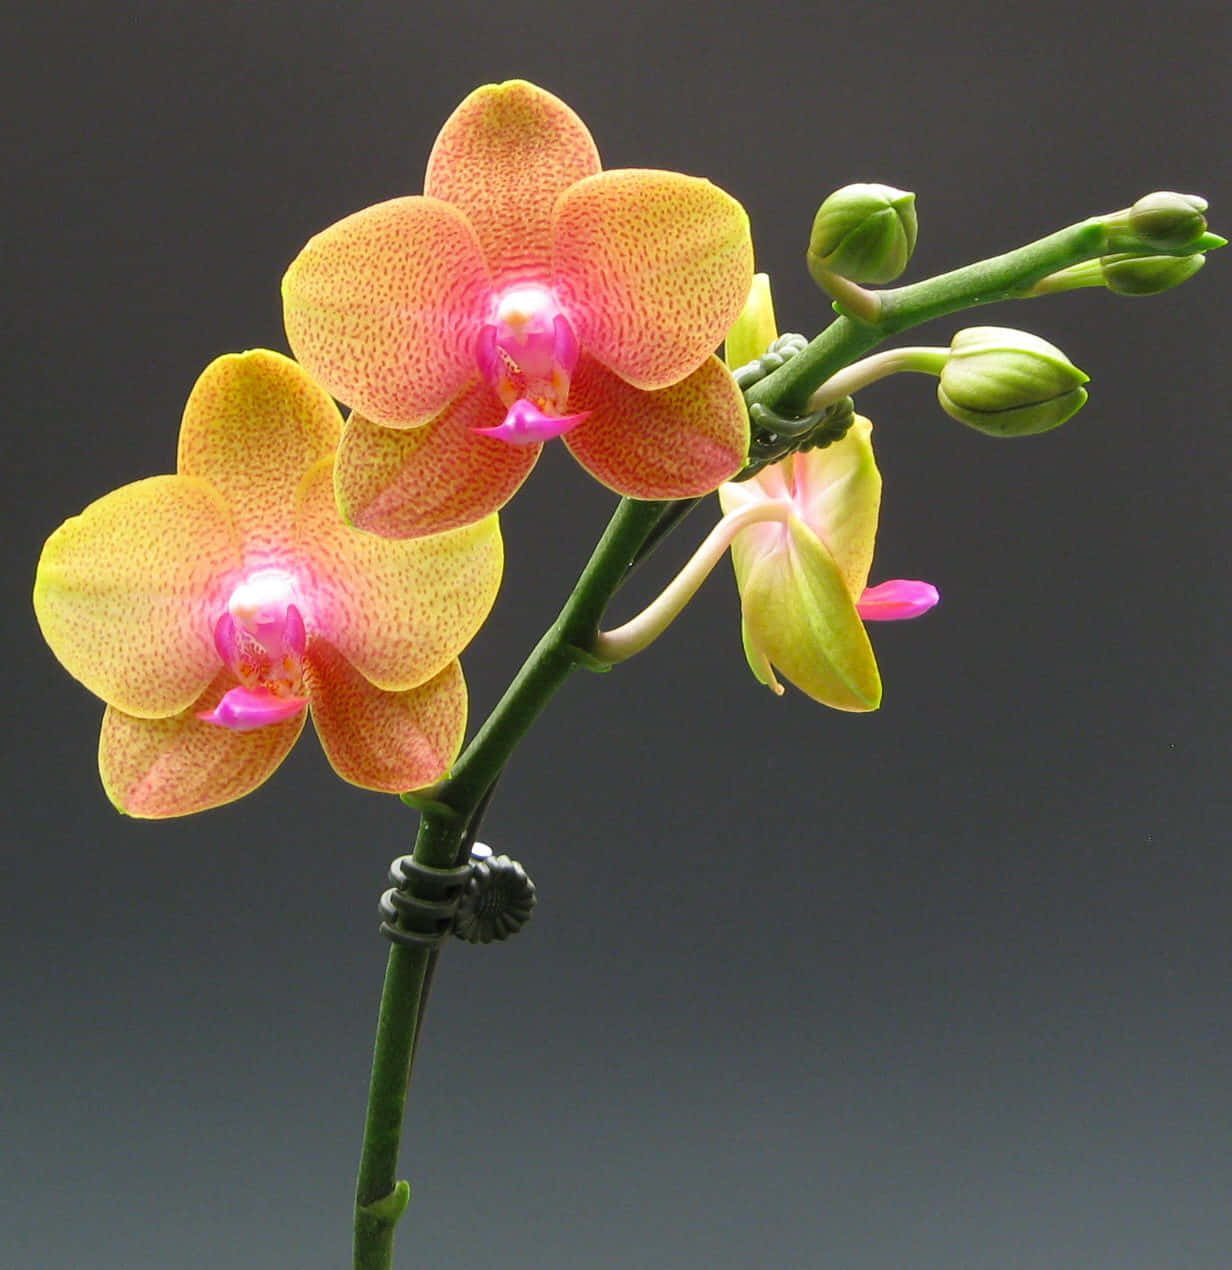 Two Yellow Orchids Are In A Vase